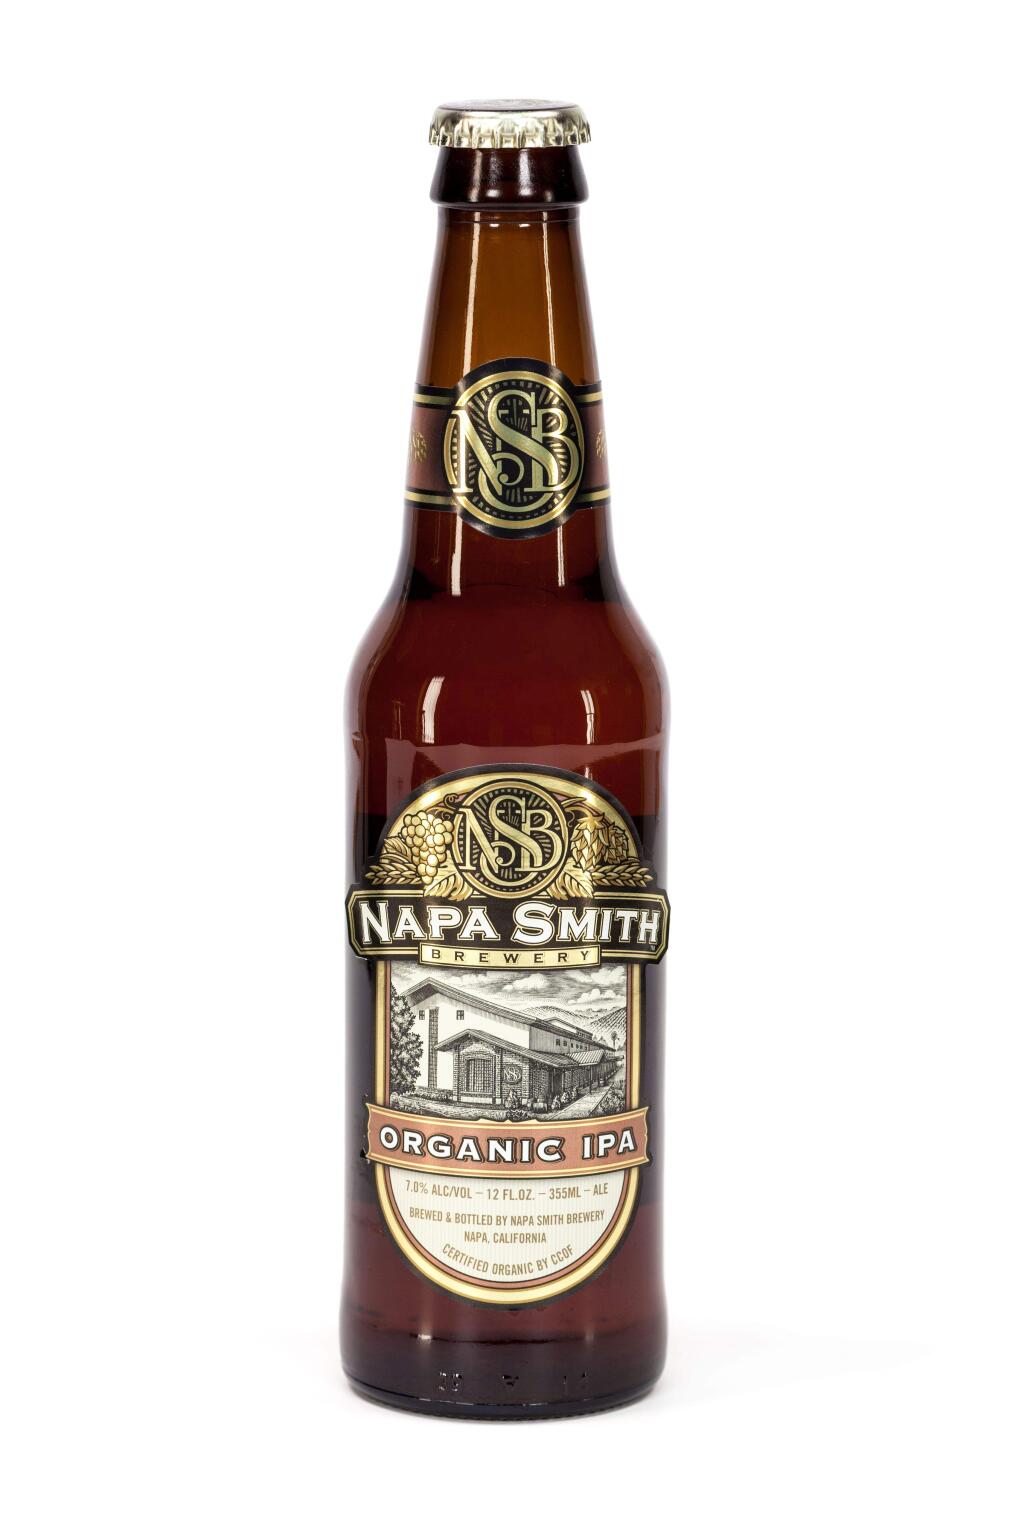 Napa Smith Brewery's Organic IPA has a large presence in Sweden.